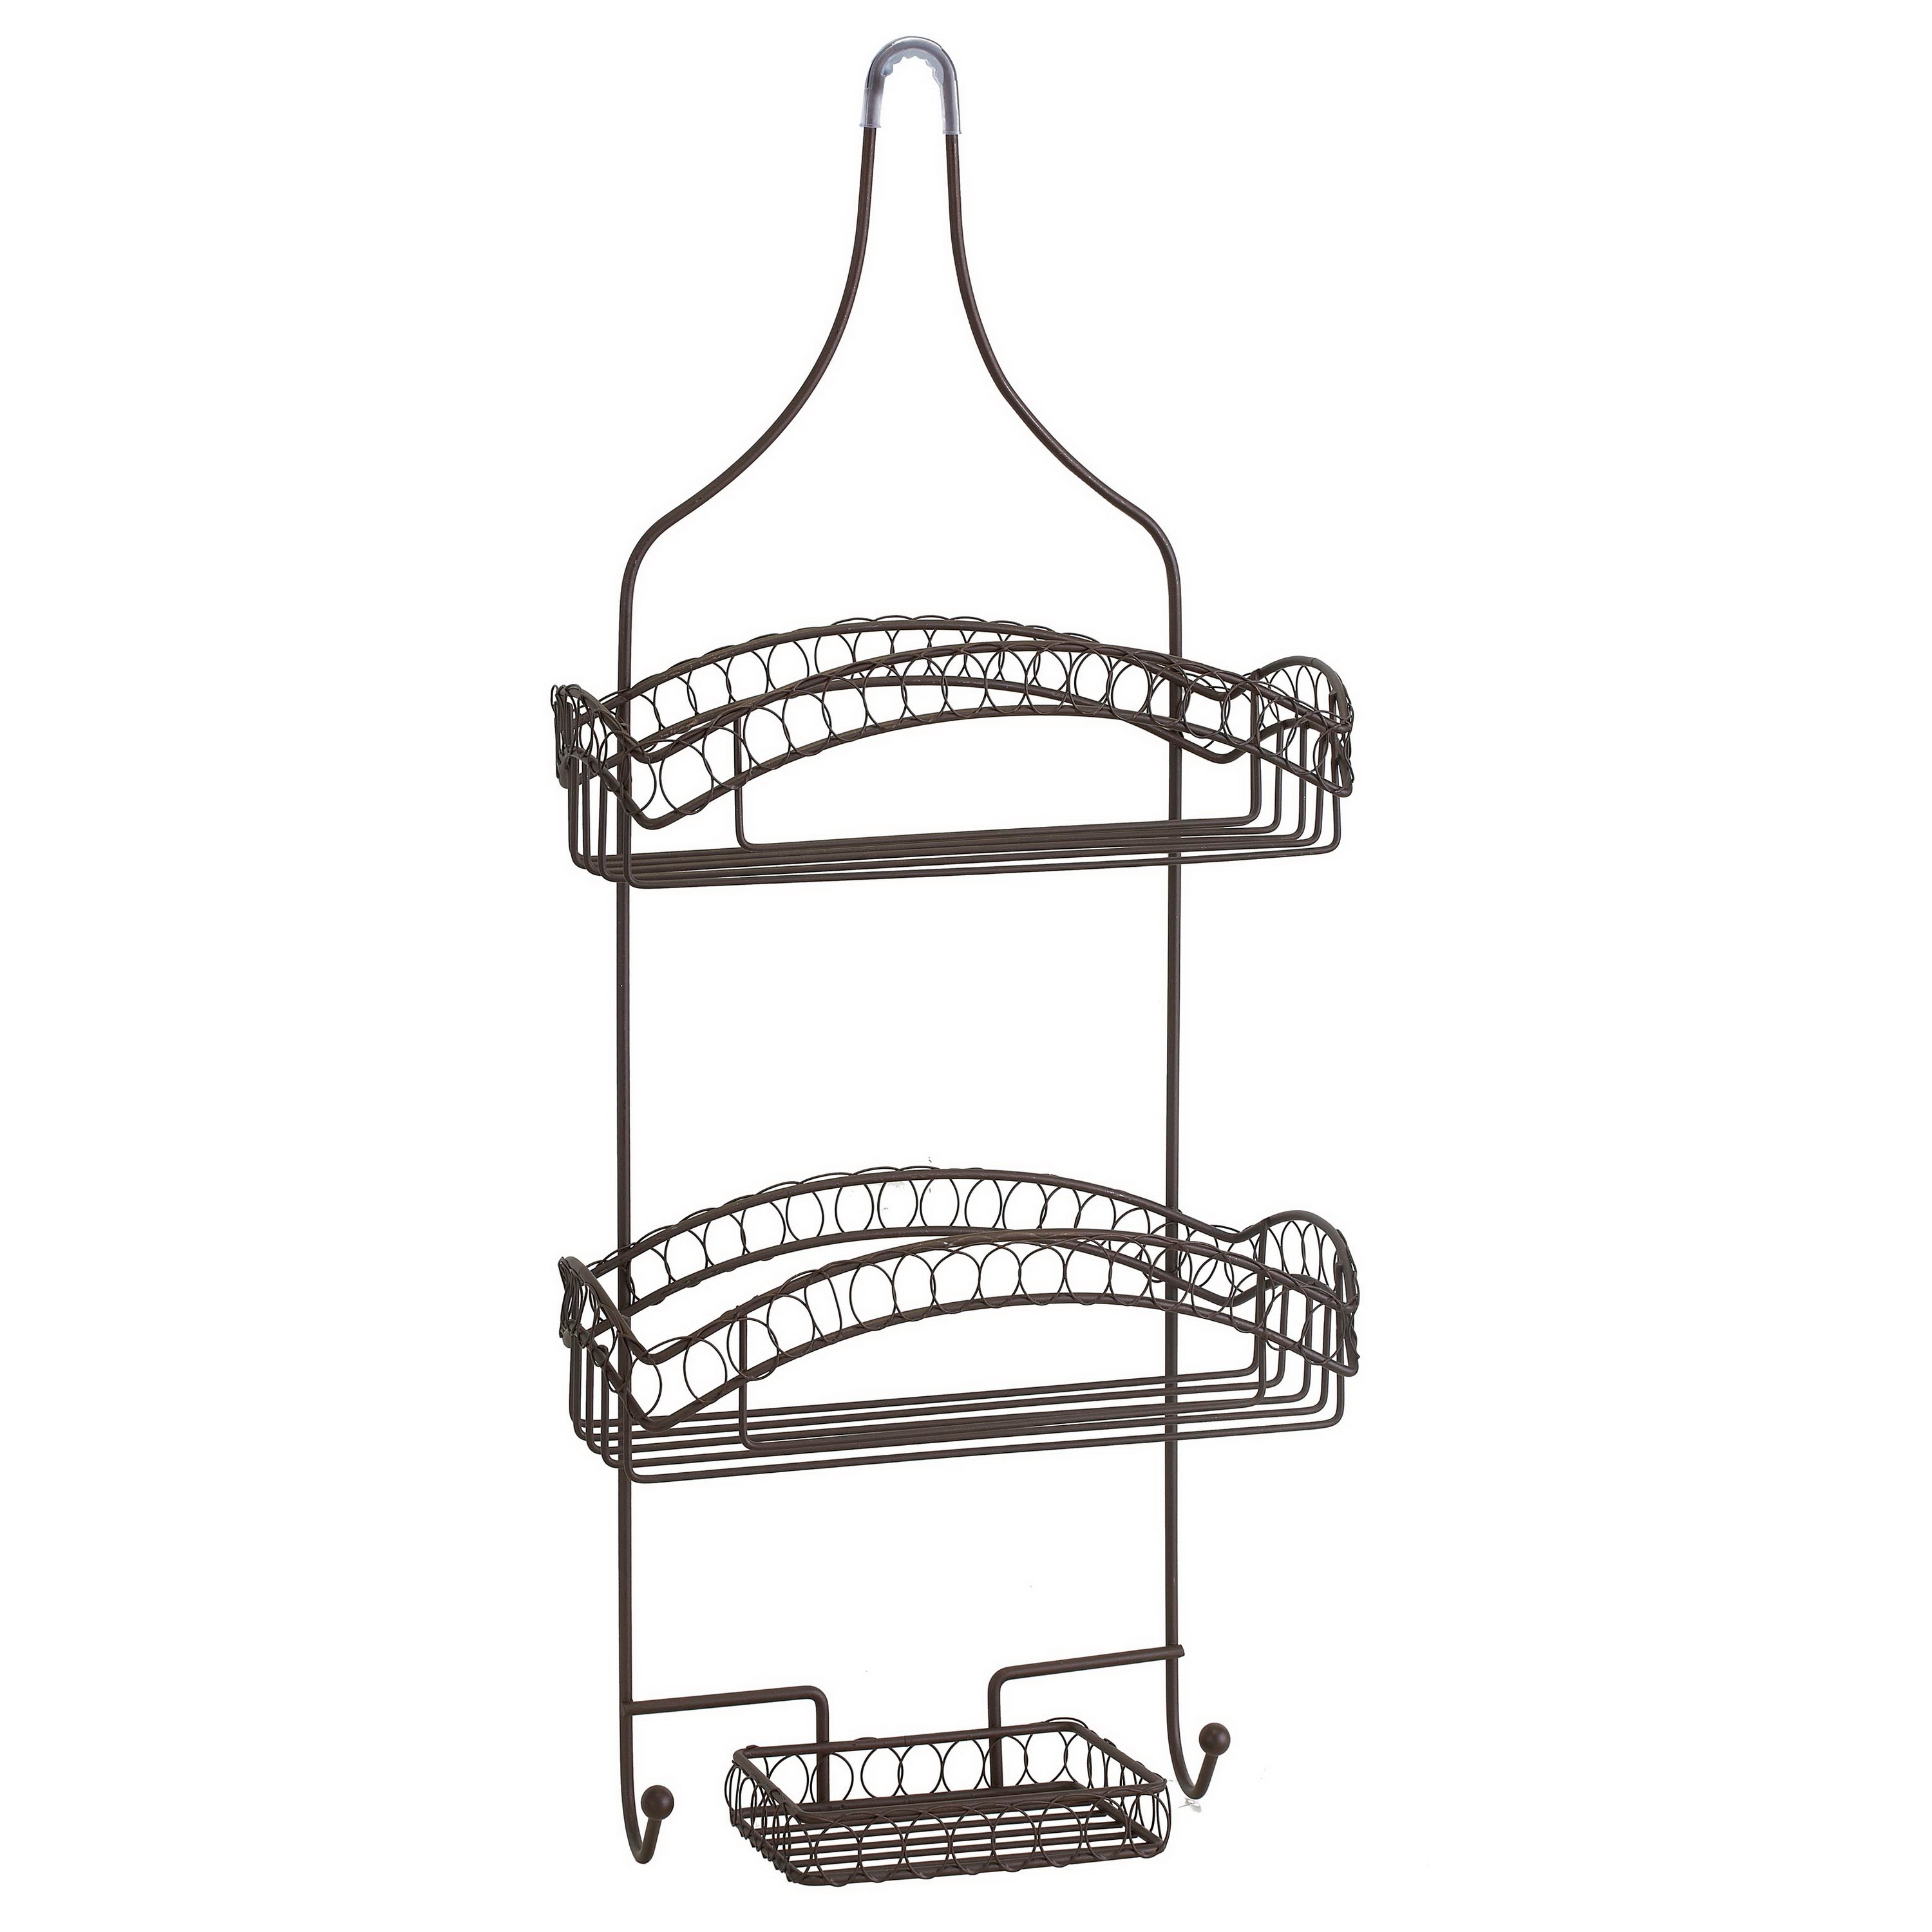 Bath Bliss 3-Tier Hanging Suction Shower Caddy in White 10114